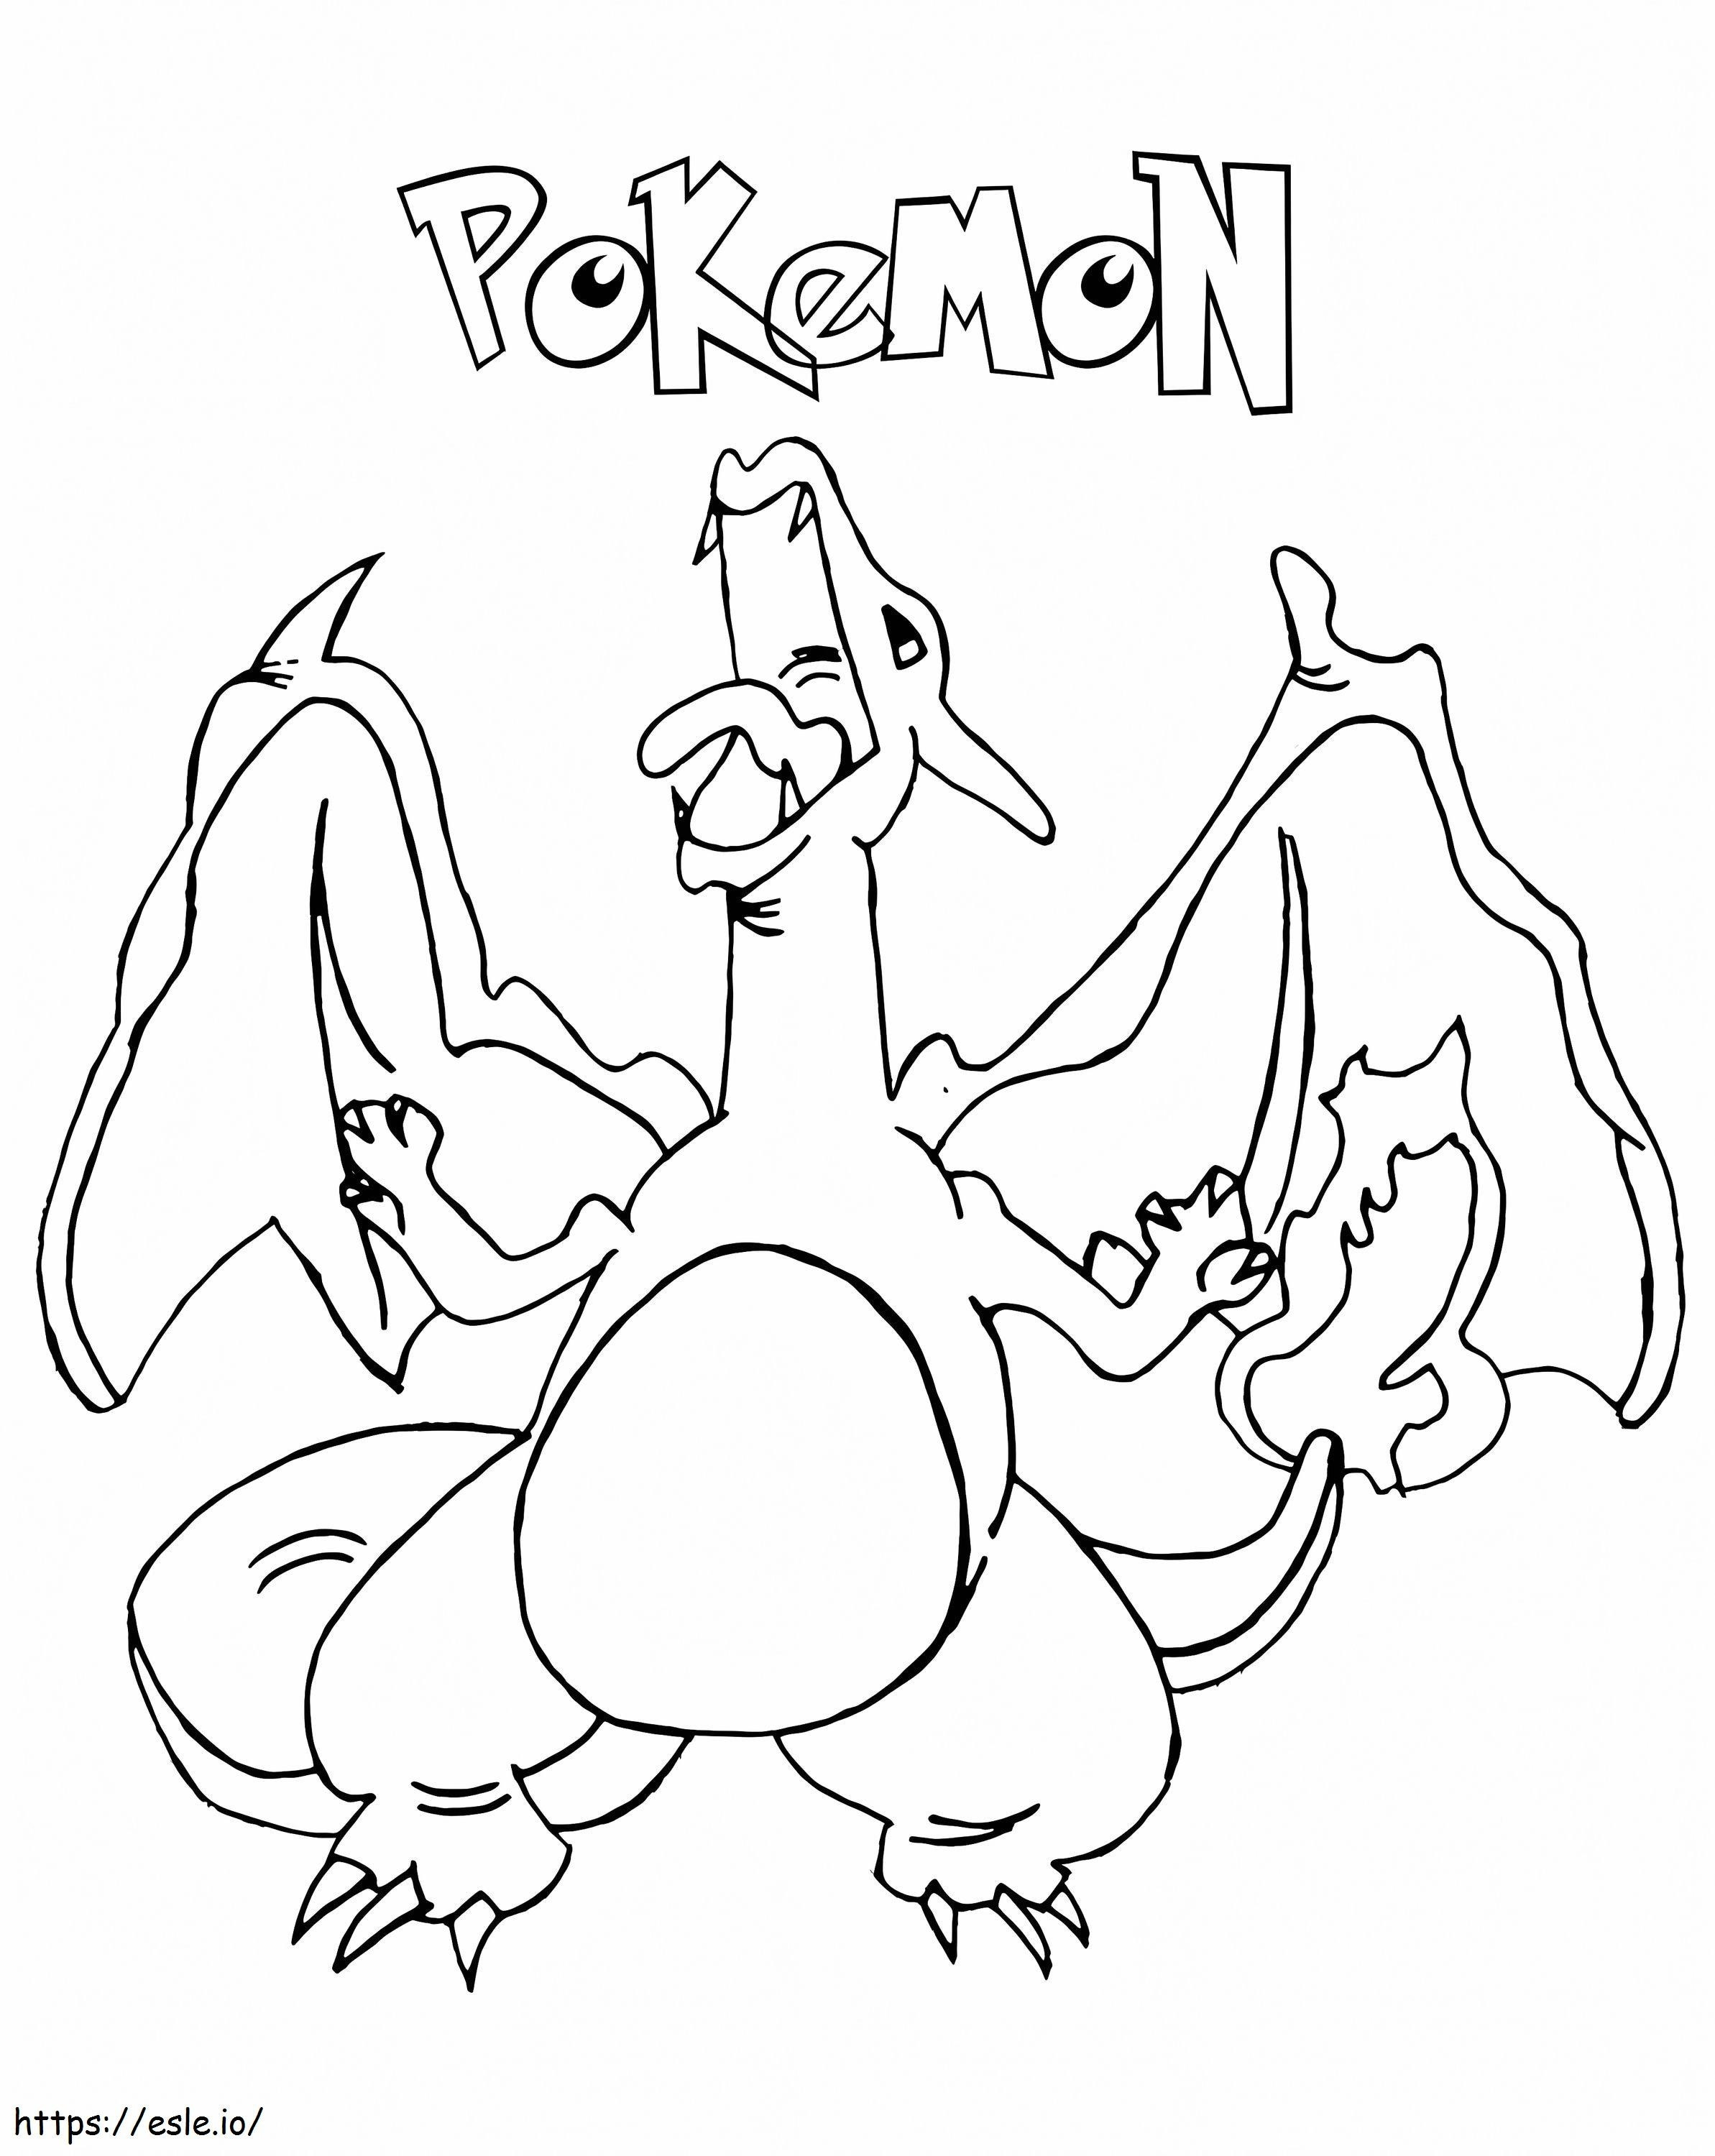 Amazing Charizard coloring page